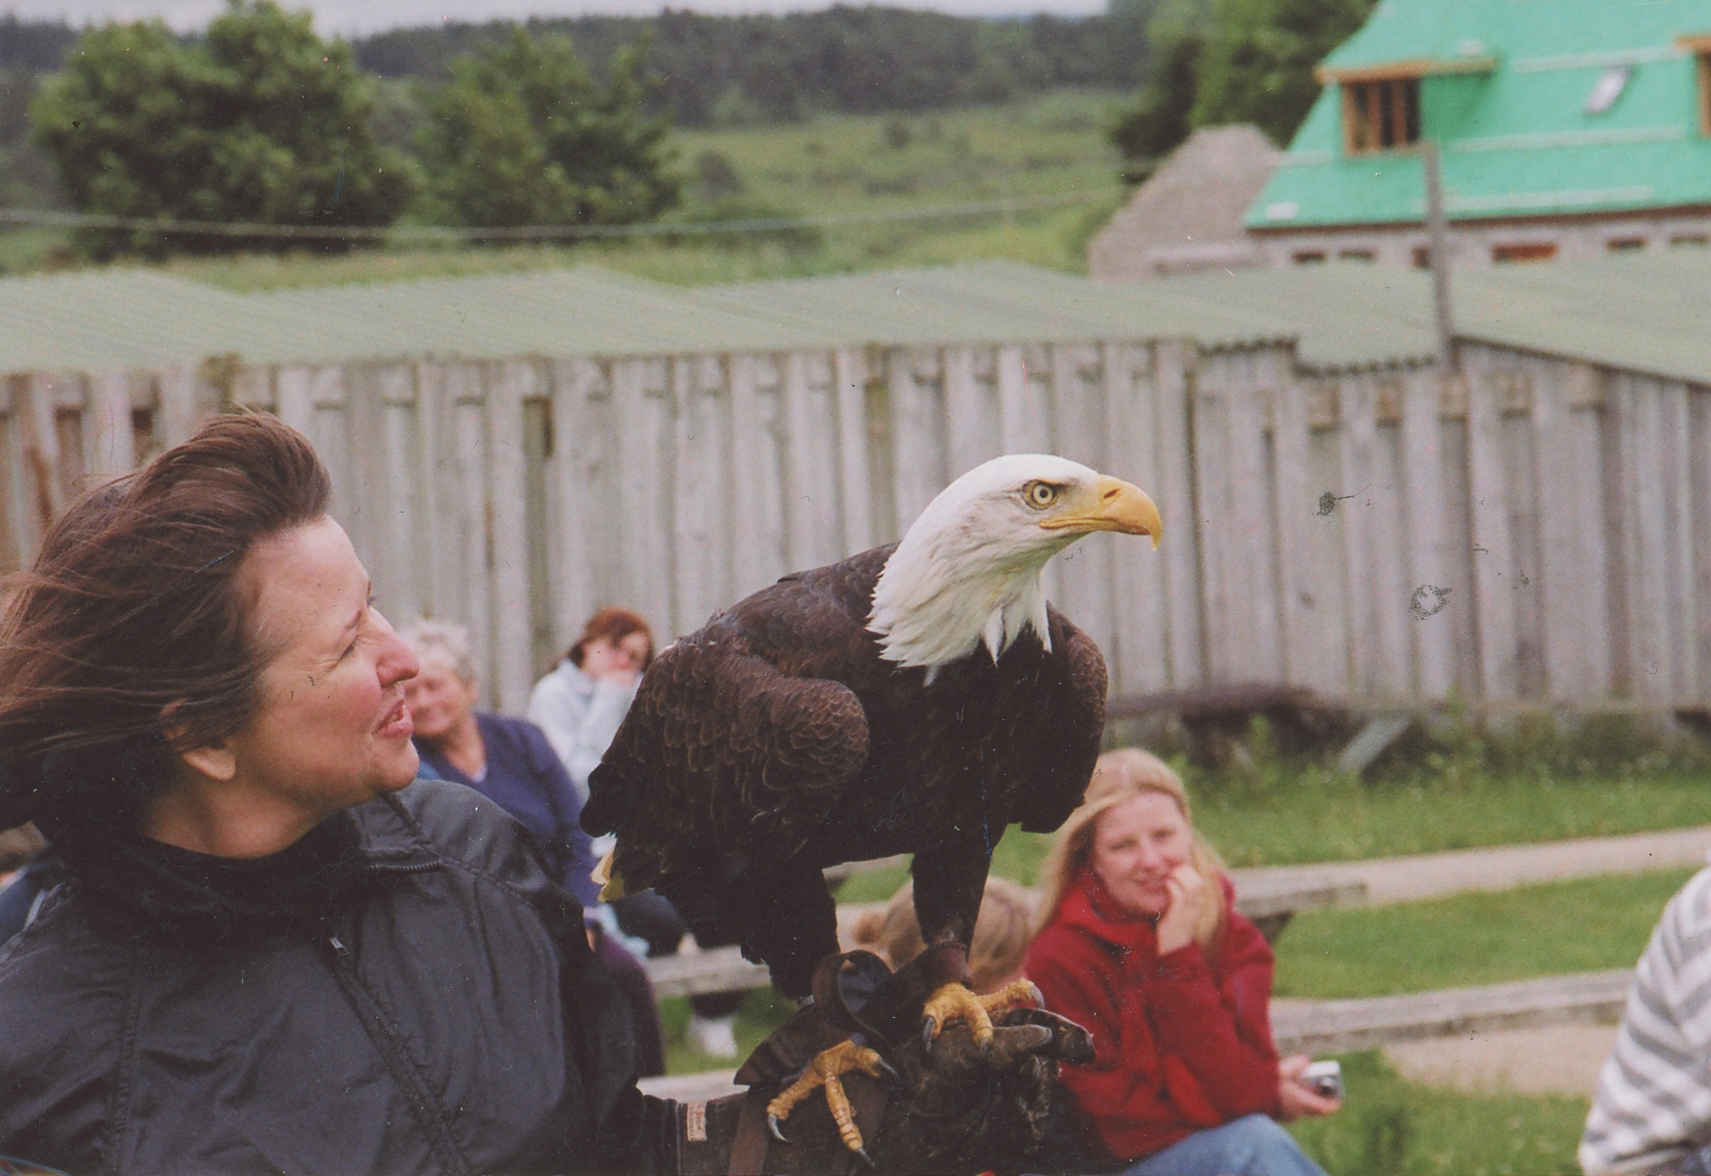 Ann James Massey at the North East Falconry Centre near Aberdeen in 2007